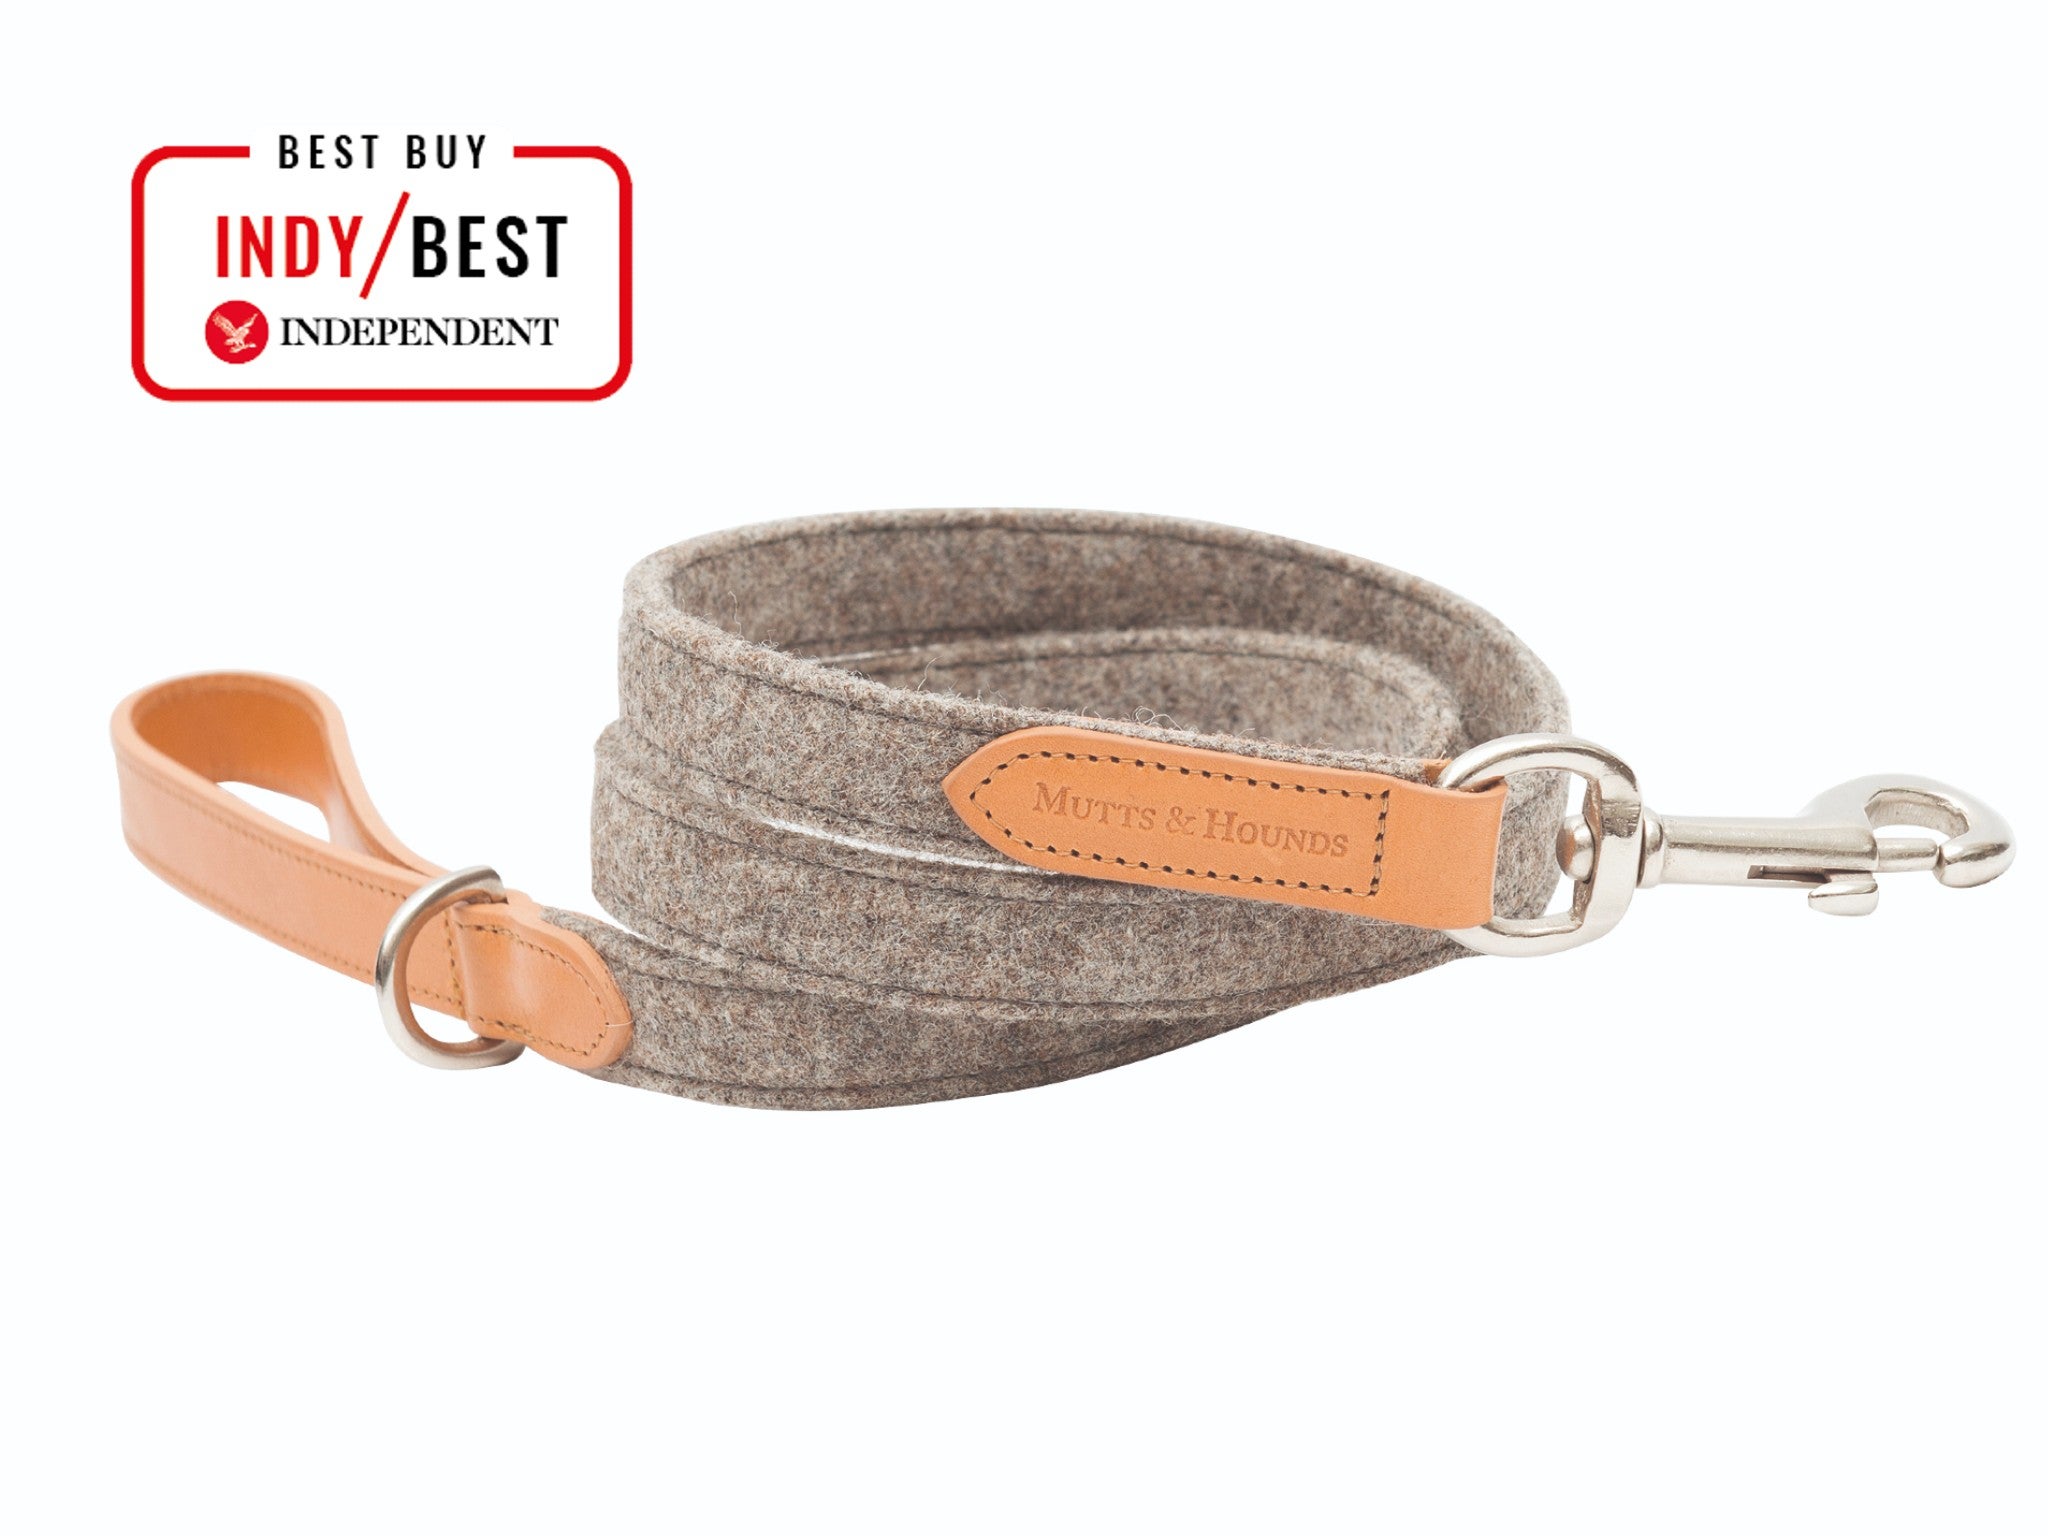 Mutts and Hounds Camello leather & grey tweed dog lead indybest